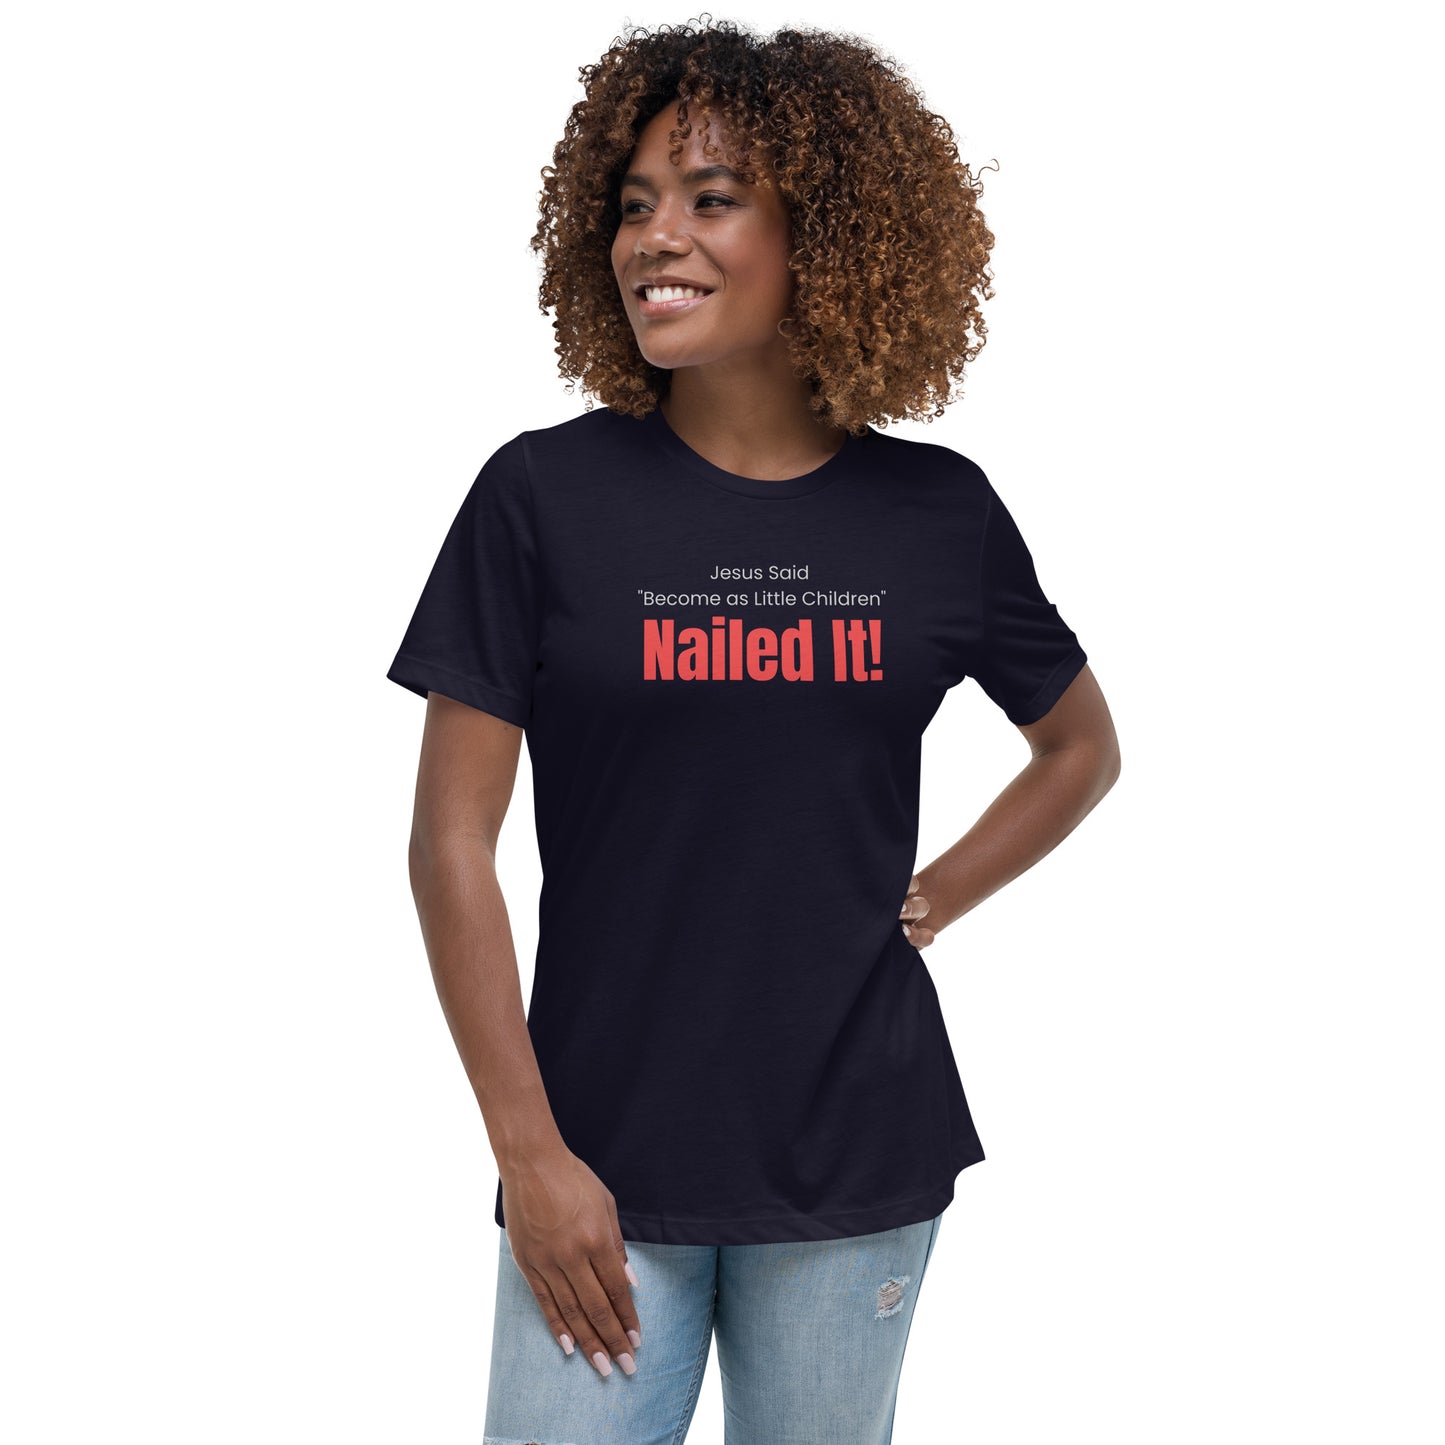 Jesus Said Become as Little Children NAILED IT! Women's Relaxed T-Shirt